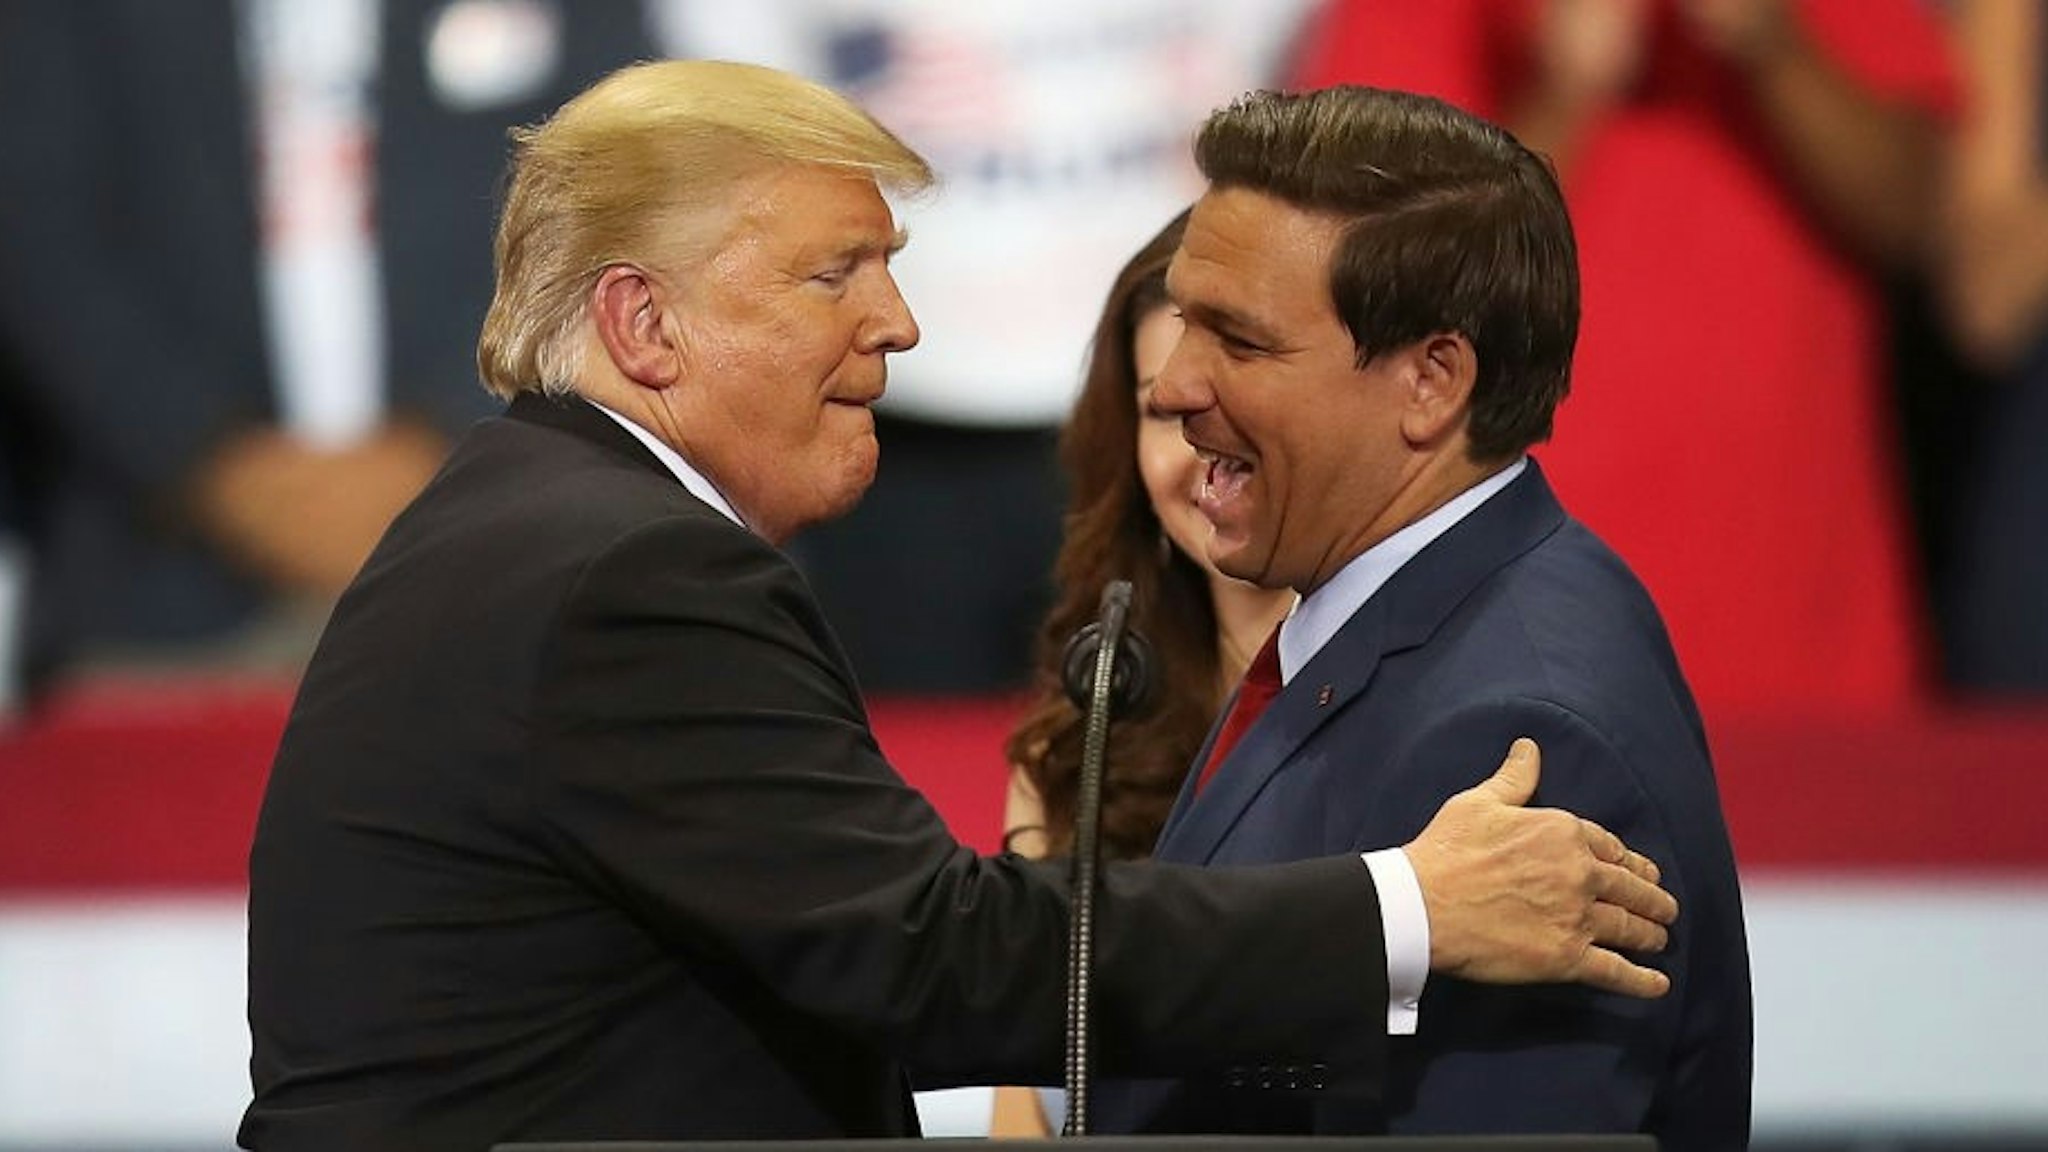 ESTERO, FL - OCTOBER 31: President Donald Trump greets Florida Republican gubernatorial candidate Ron DeSantis during a campaign rally at the Hertz Arena on October 31, 2018 in Estero, Florida. President Trump continues traveling across America to help get the vote out for Republican candidates running for office. (Photo by